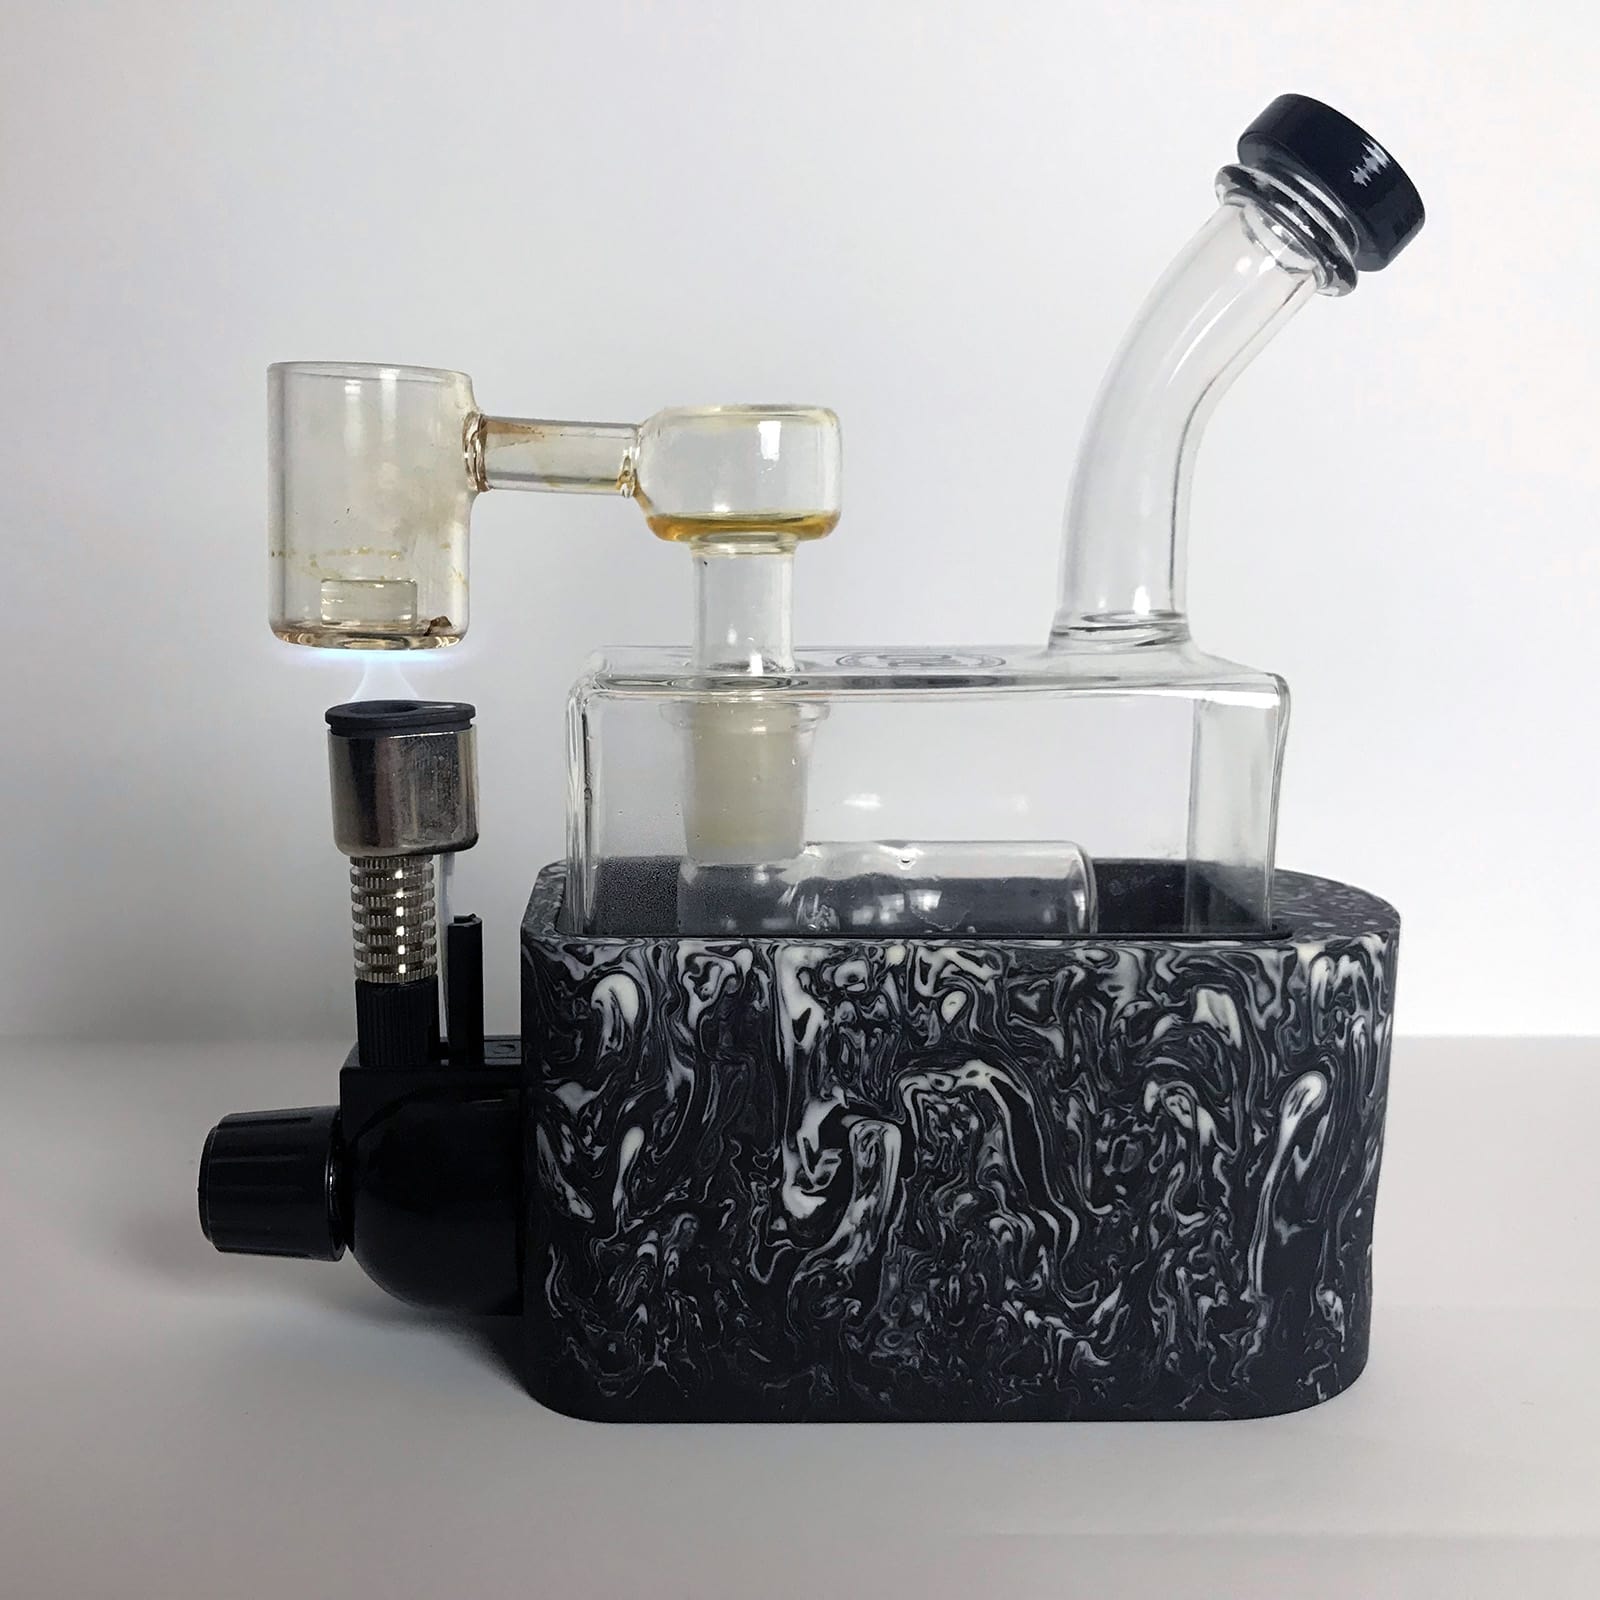 Rio - Cold Start Dab Rig with built in torch